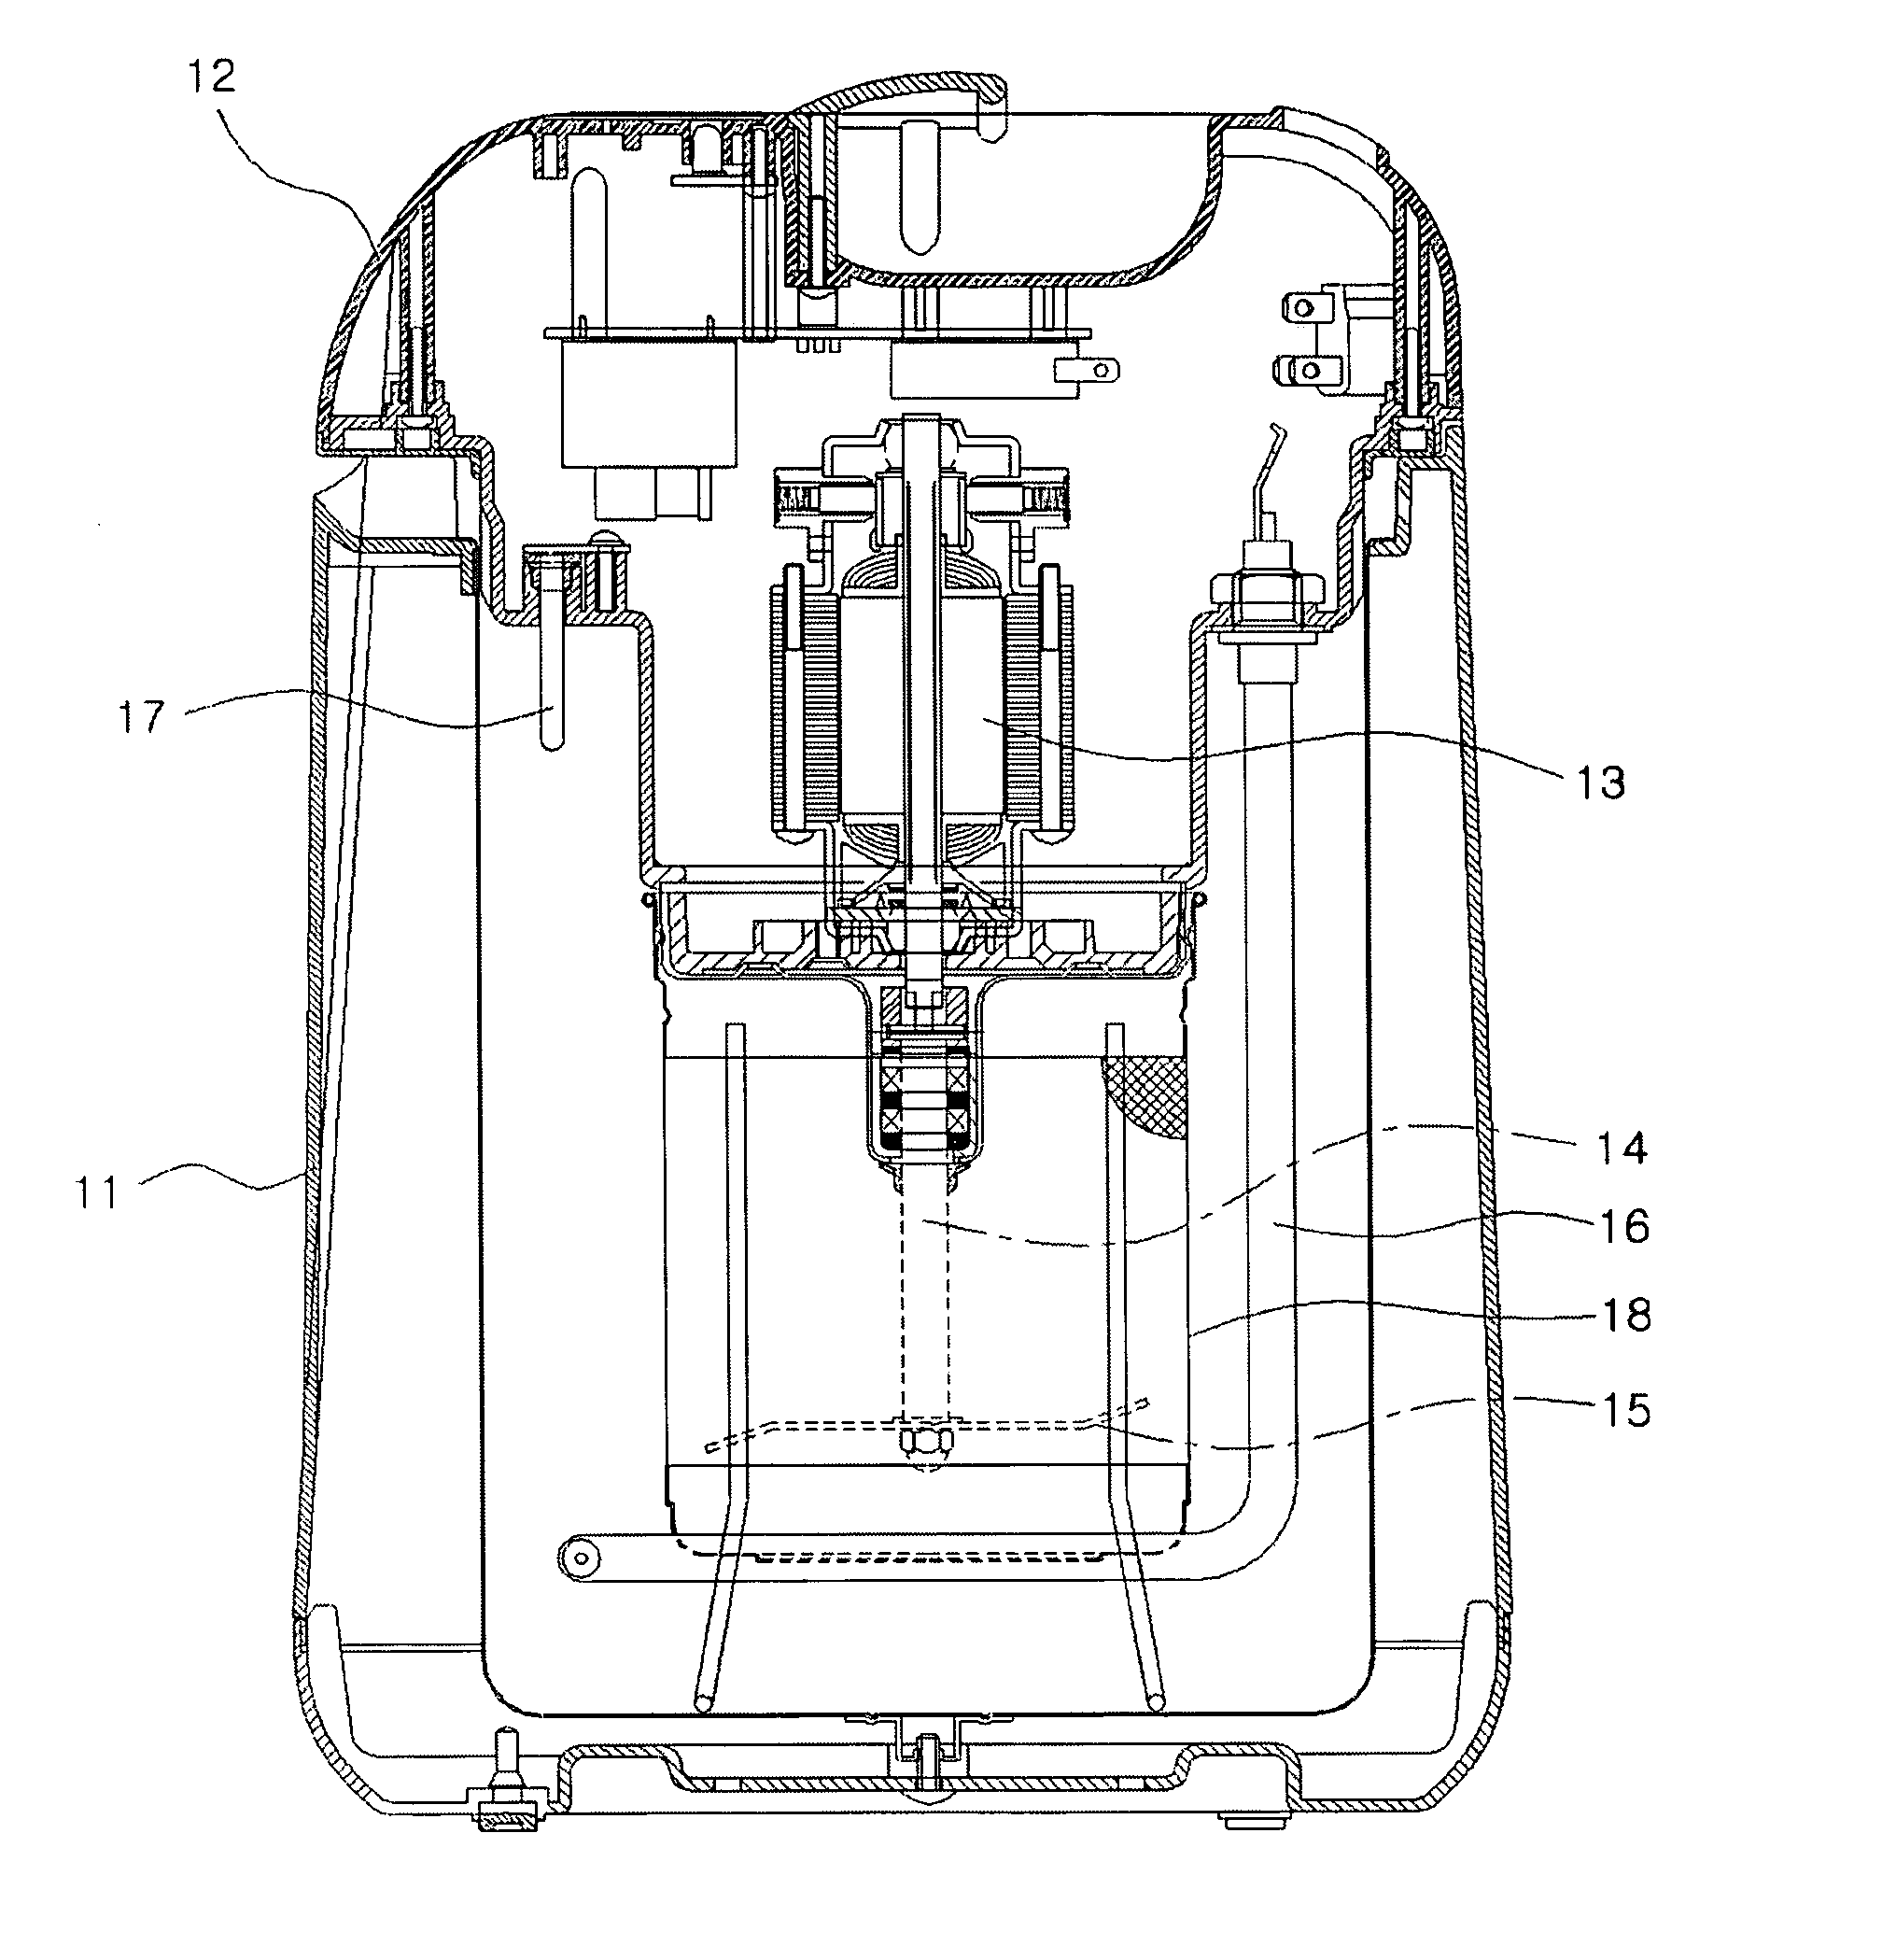 Heating control apparatus and method for controlling household bean milk and bean curd makers